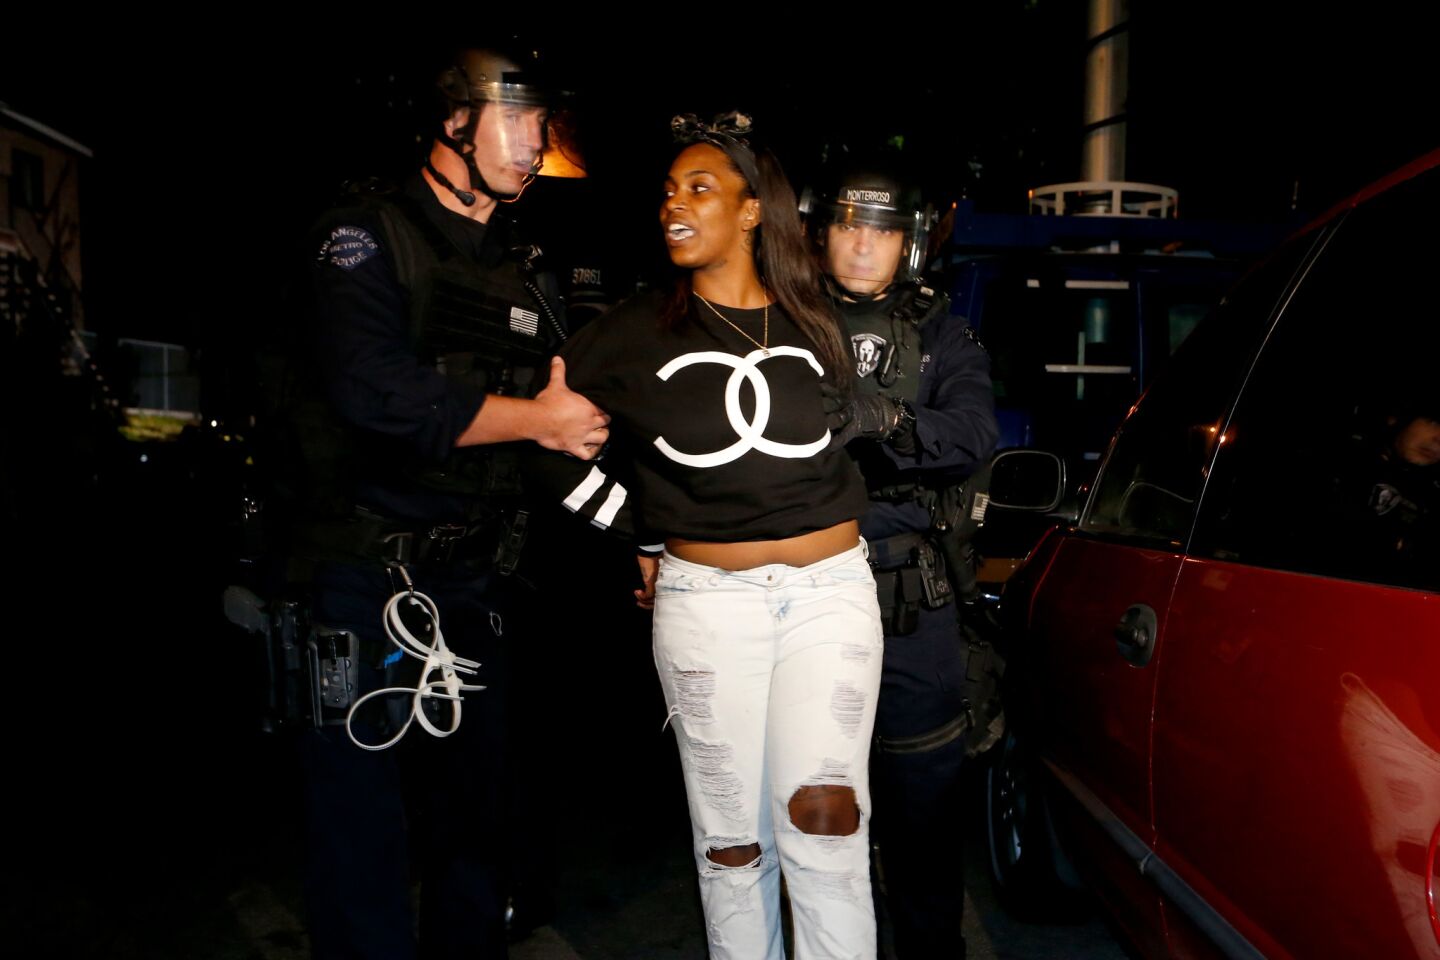 An activist is arrested by LAPD after they gave orders to clear the area along 107th Street. Protesters were rallying after police shot an 18-year-old in South L.A.